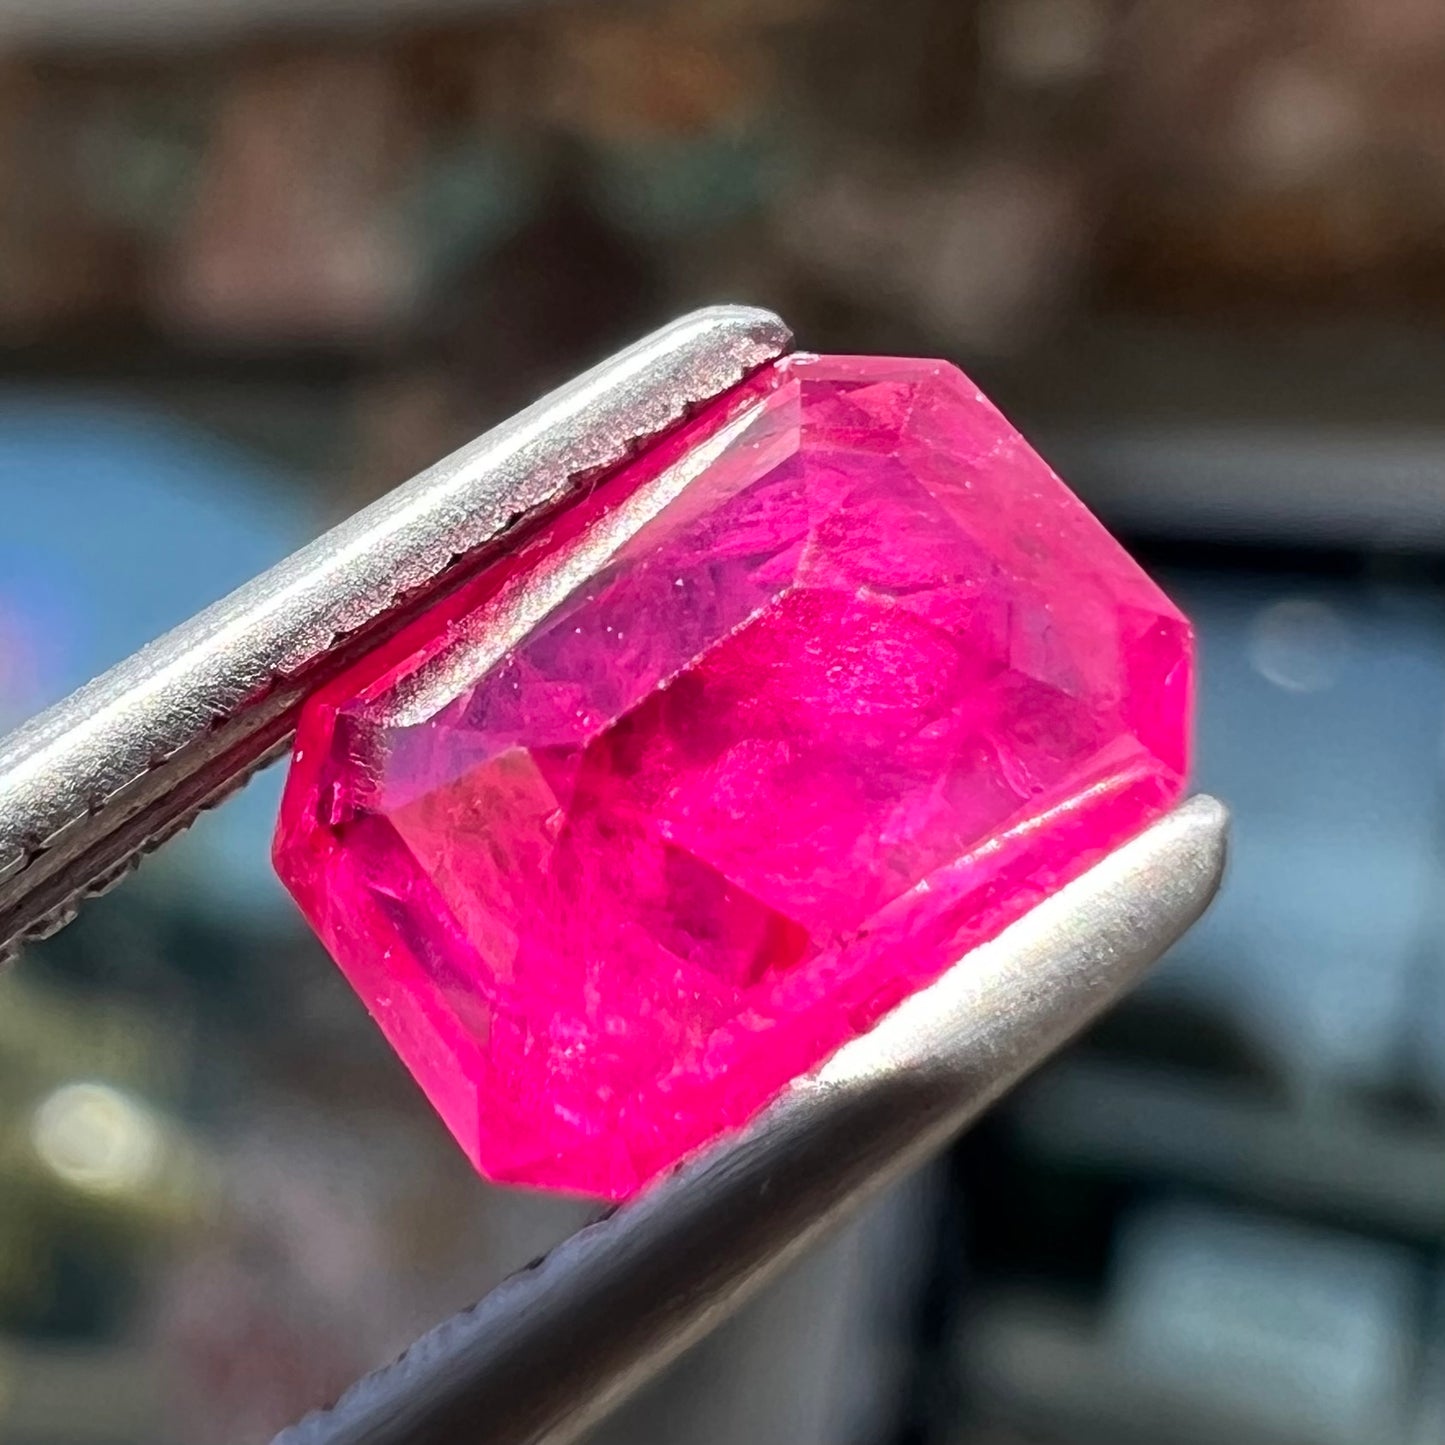 An emerald cut Burma ruby gemstone.  The stone is loose and a pinkish red color.